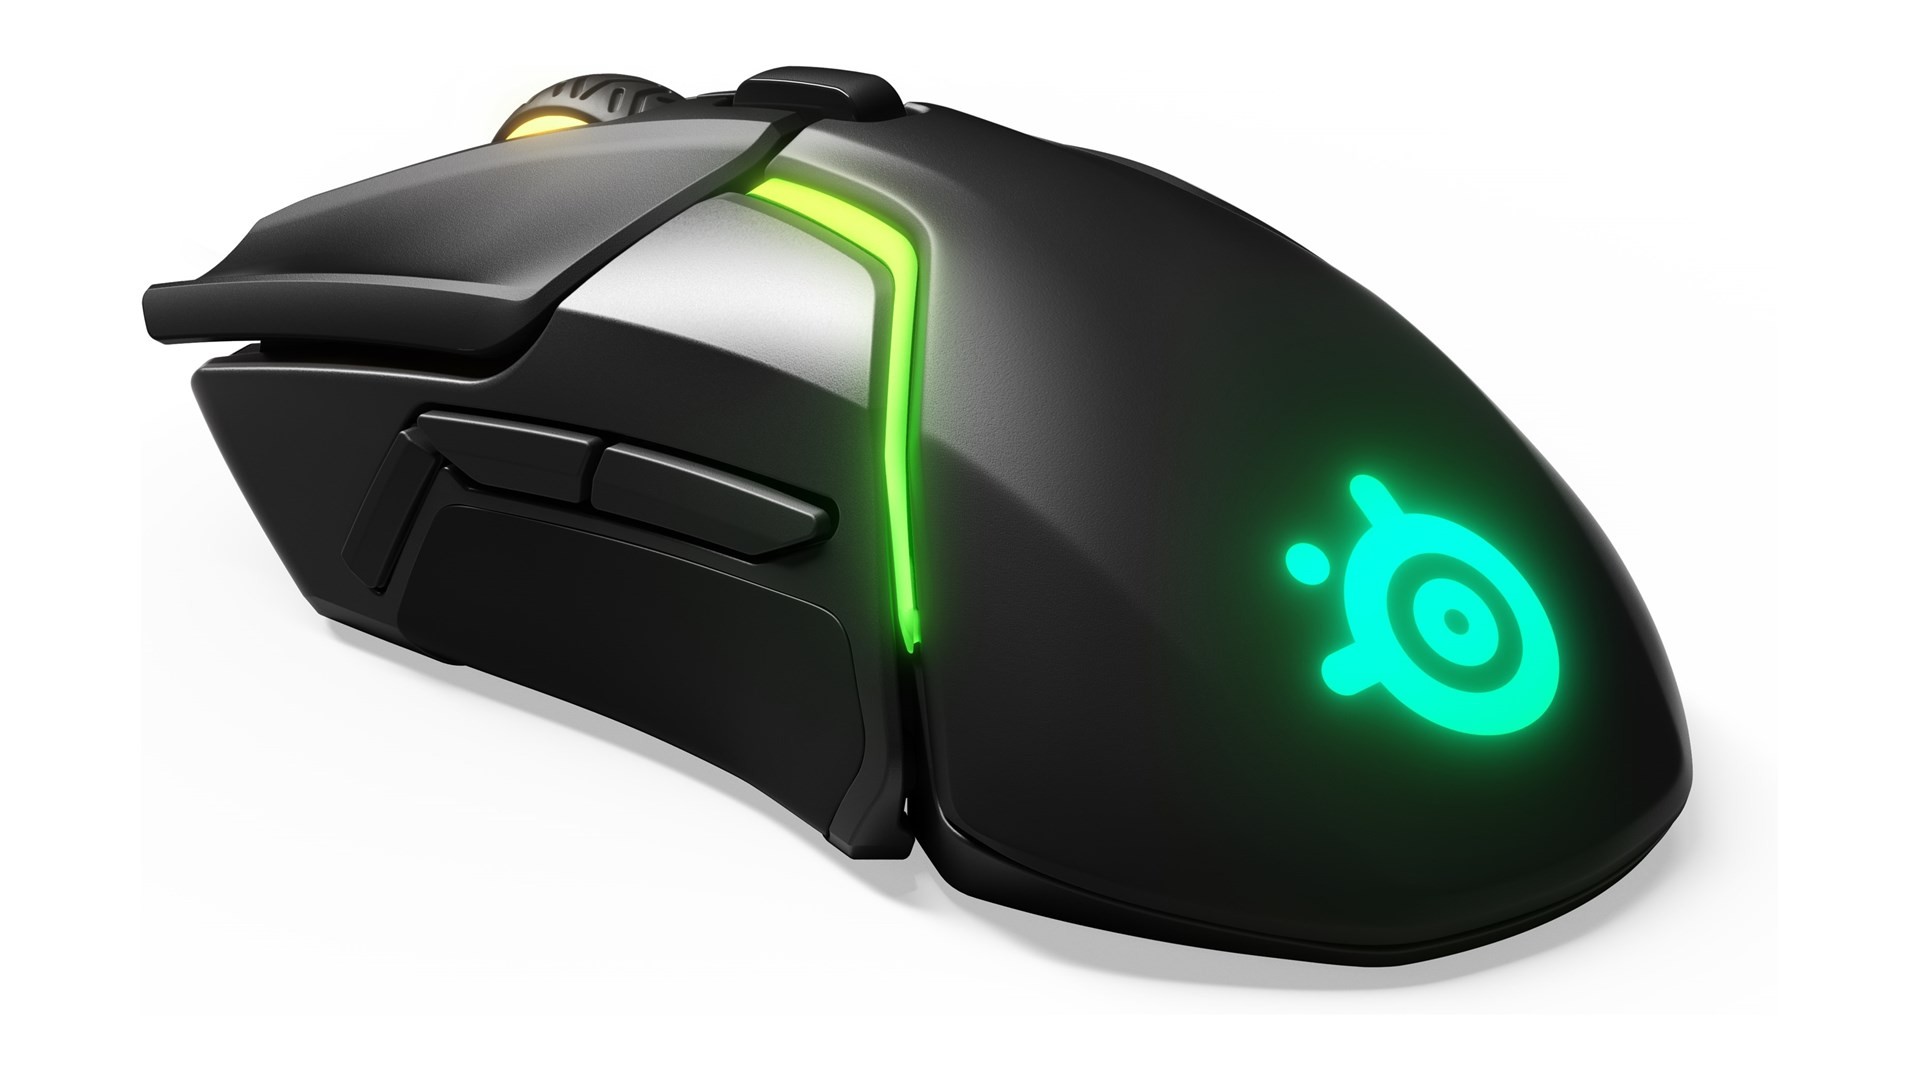 Steelseries Rival 650 Wireless gaming mouse